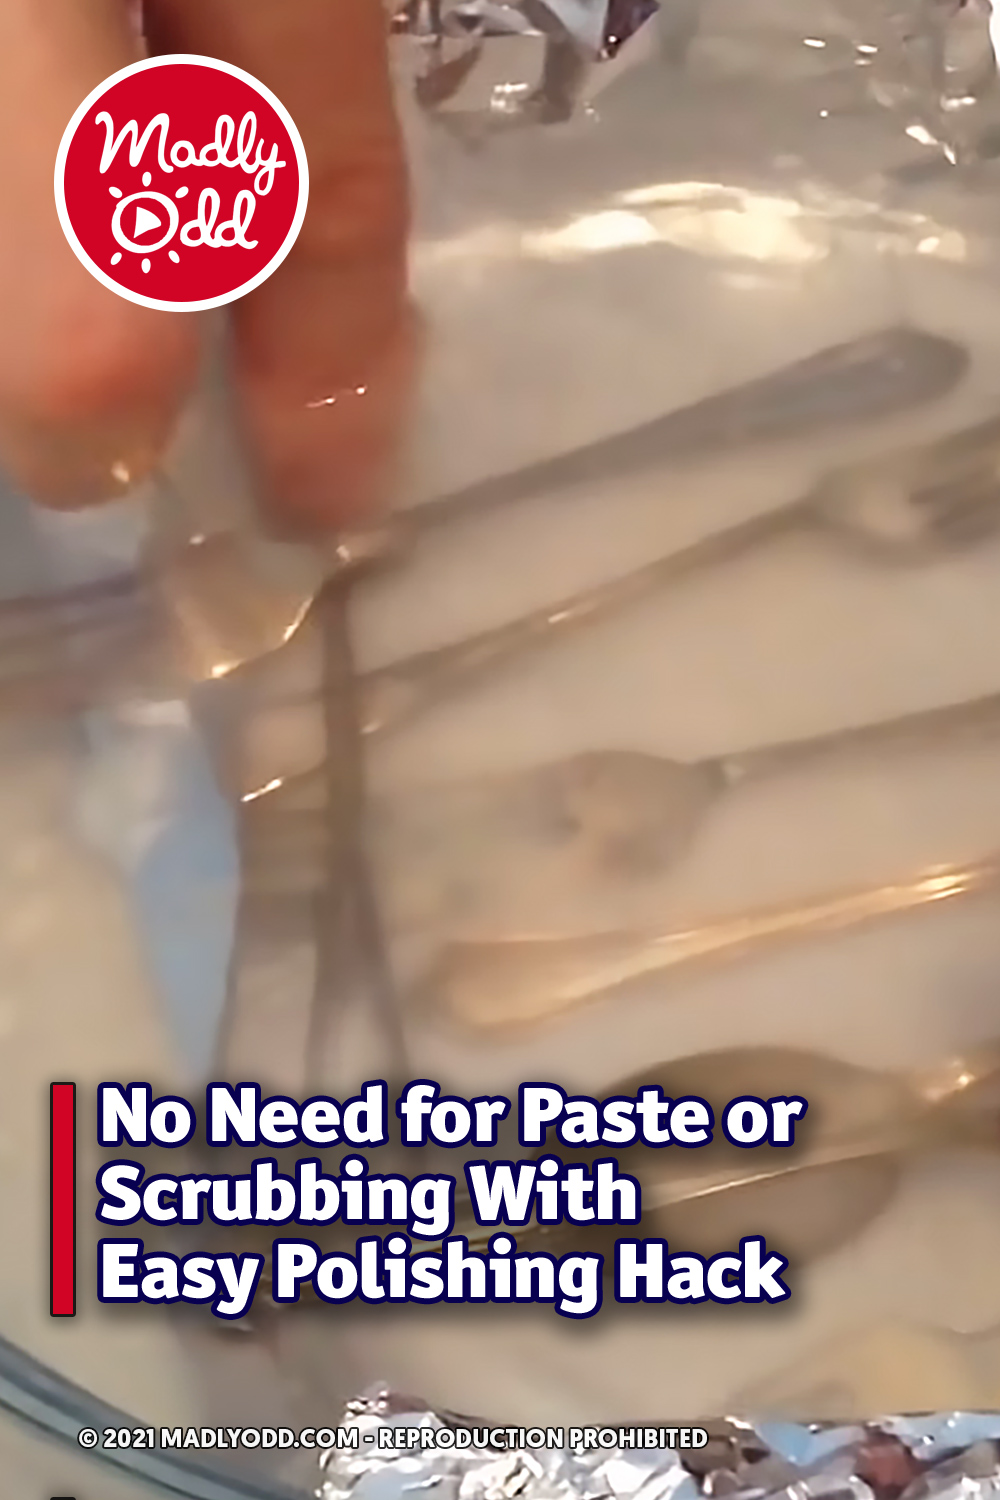 No Need for Paste or Scrubbing With Easy Polishing Hack